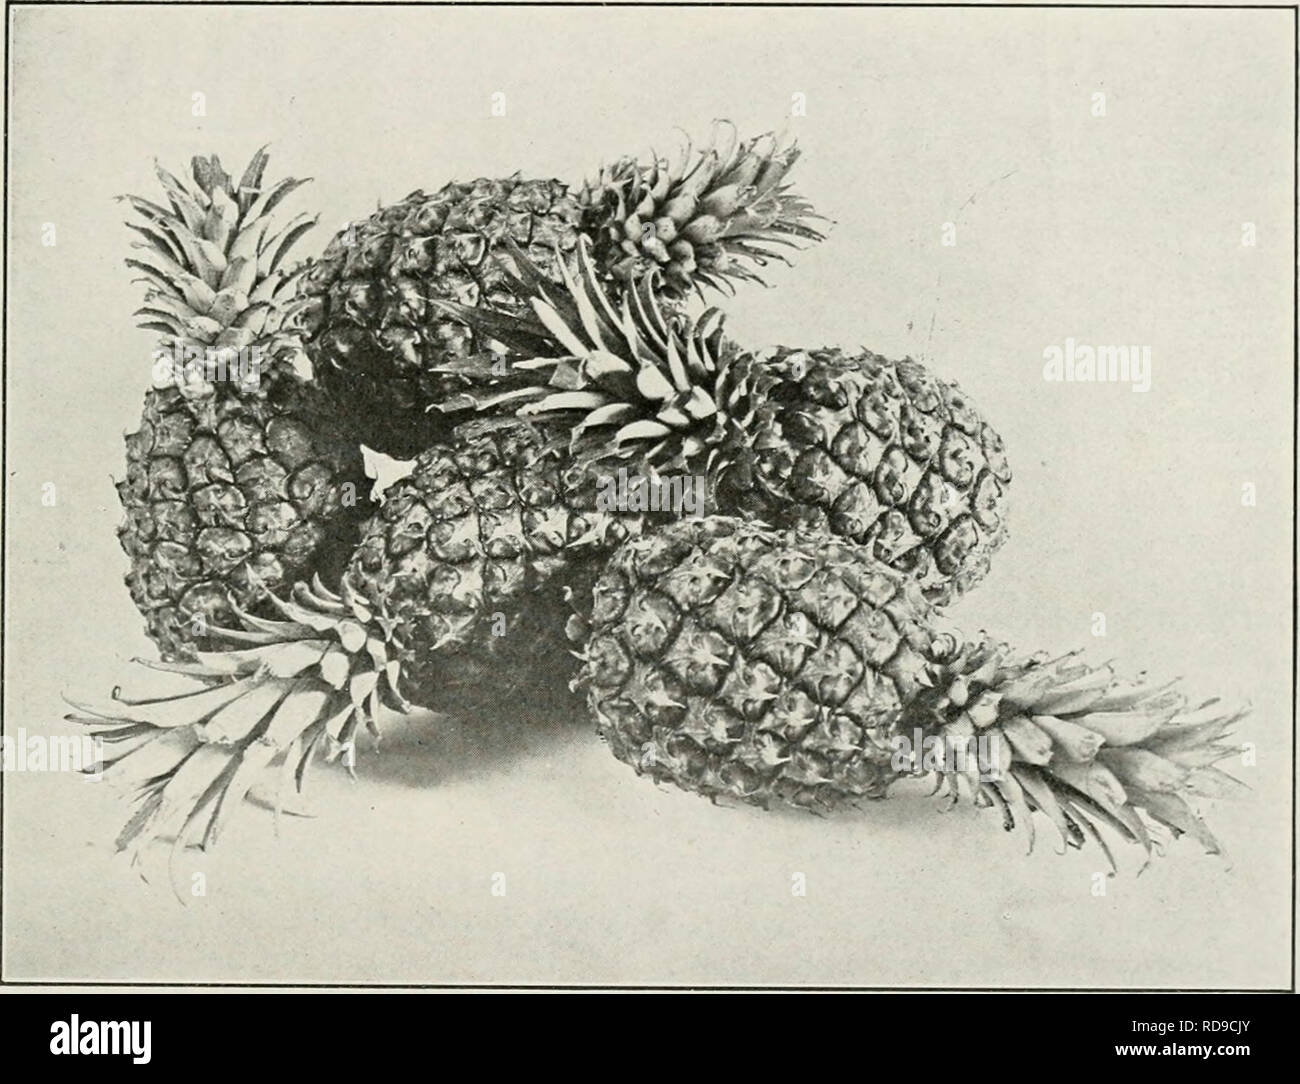 . The Cuba review. Cuba -- Periodicals. the CC P. A It E V I E v 11 PINEAPPLE CULTURE IN CUBA By Alvin Fox, Horticulturist on Tropical Plants. The pineapple is grown for export In Cuba, it thrives best in a sandy Loam, but it is frequently grown in heavy clay also. The main requirement is that the soil musl be well drained, and where it is not naturally so the plants are usually set In ridges. It is propagated from slips, the small plants on the fruit stalks or from suckers, the plants growing in tin- leaf-axils of the ther plant. These are sot at distances varying. A Group of Red Spanish Pin Stock Photo